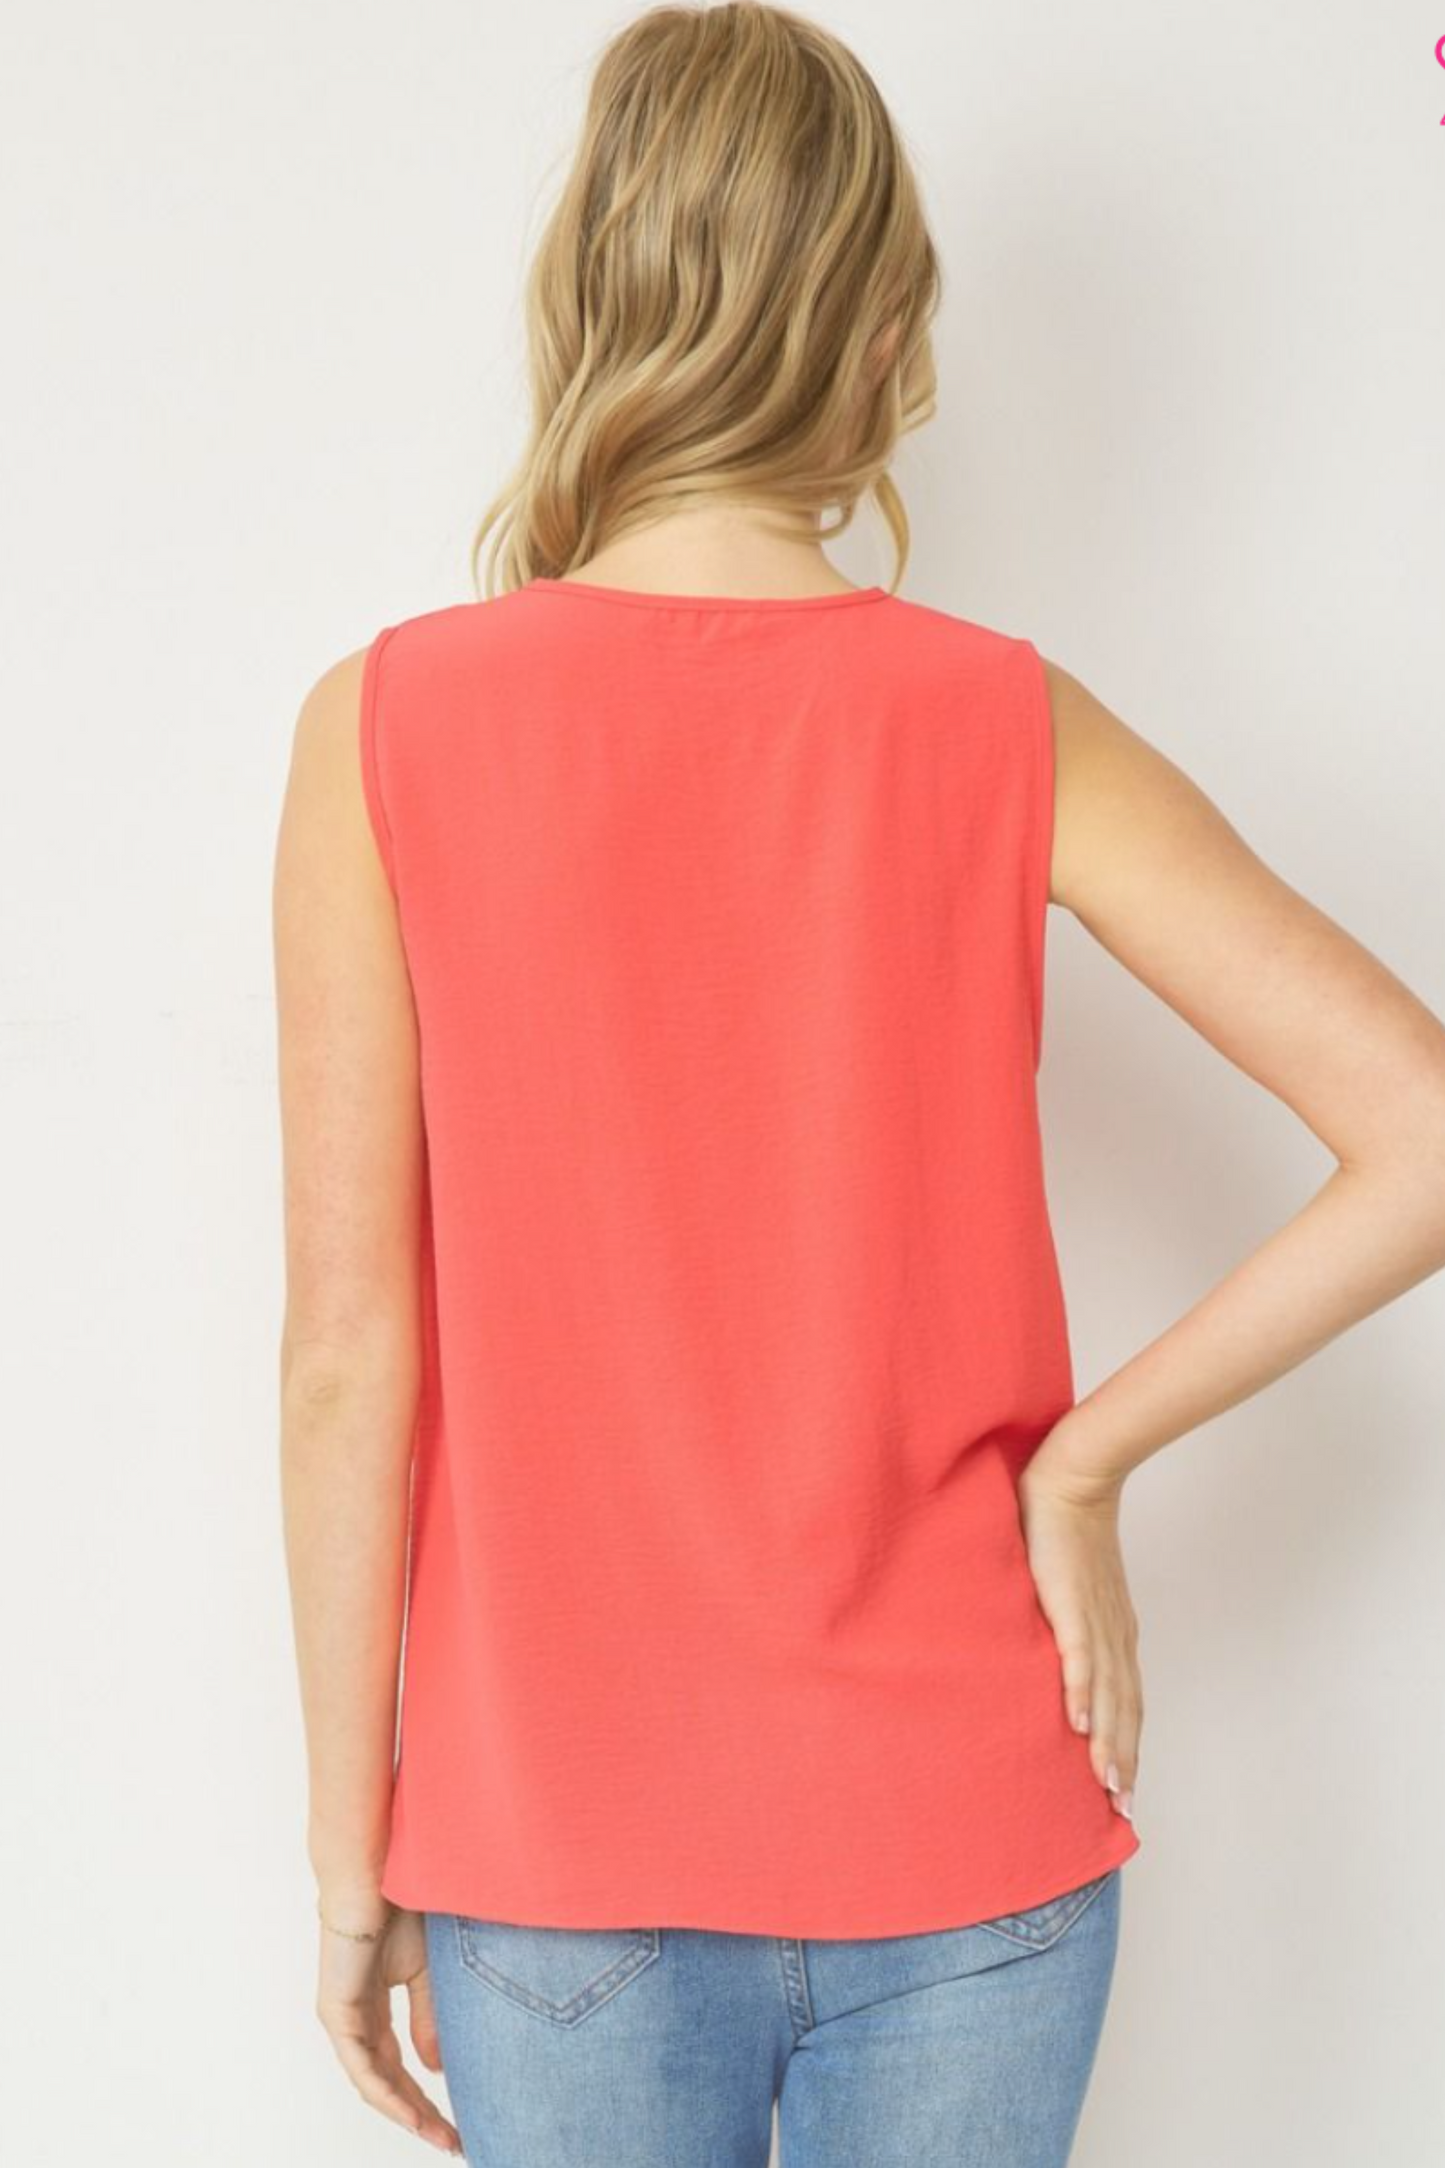 Breezy Sleeveless Top - Simply Polished Boutique